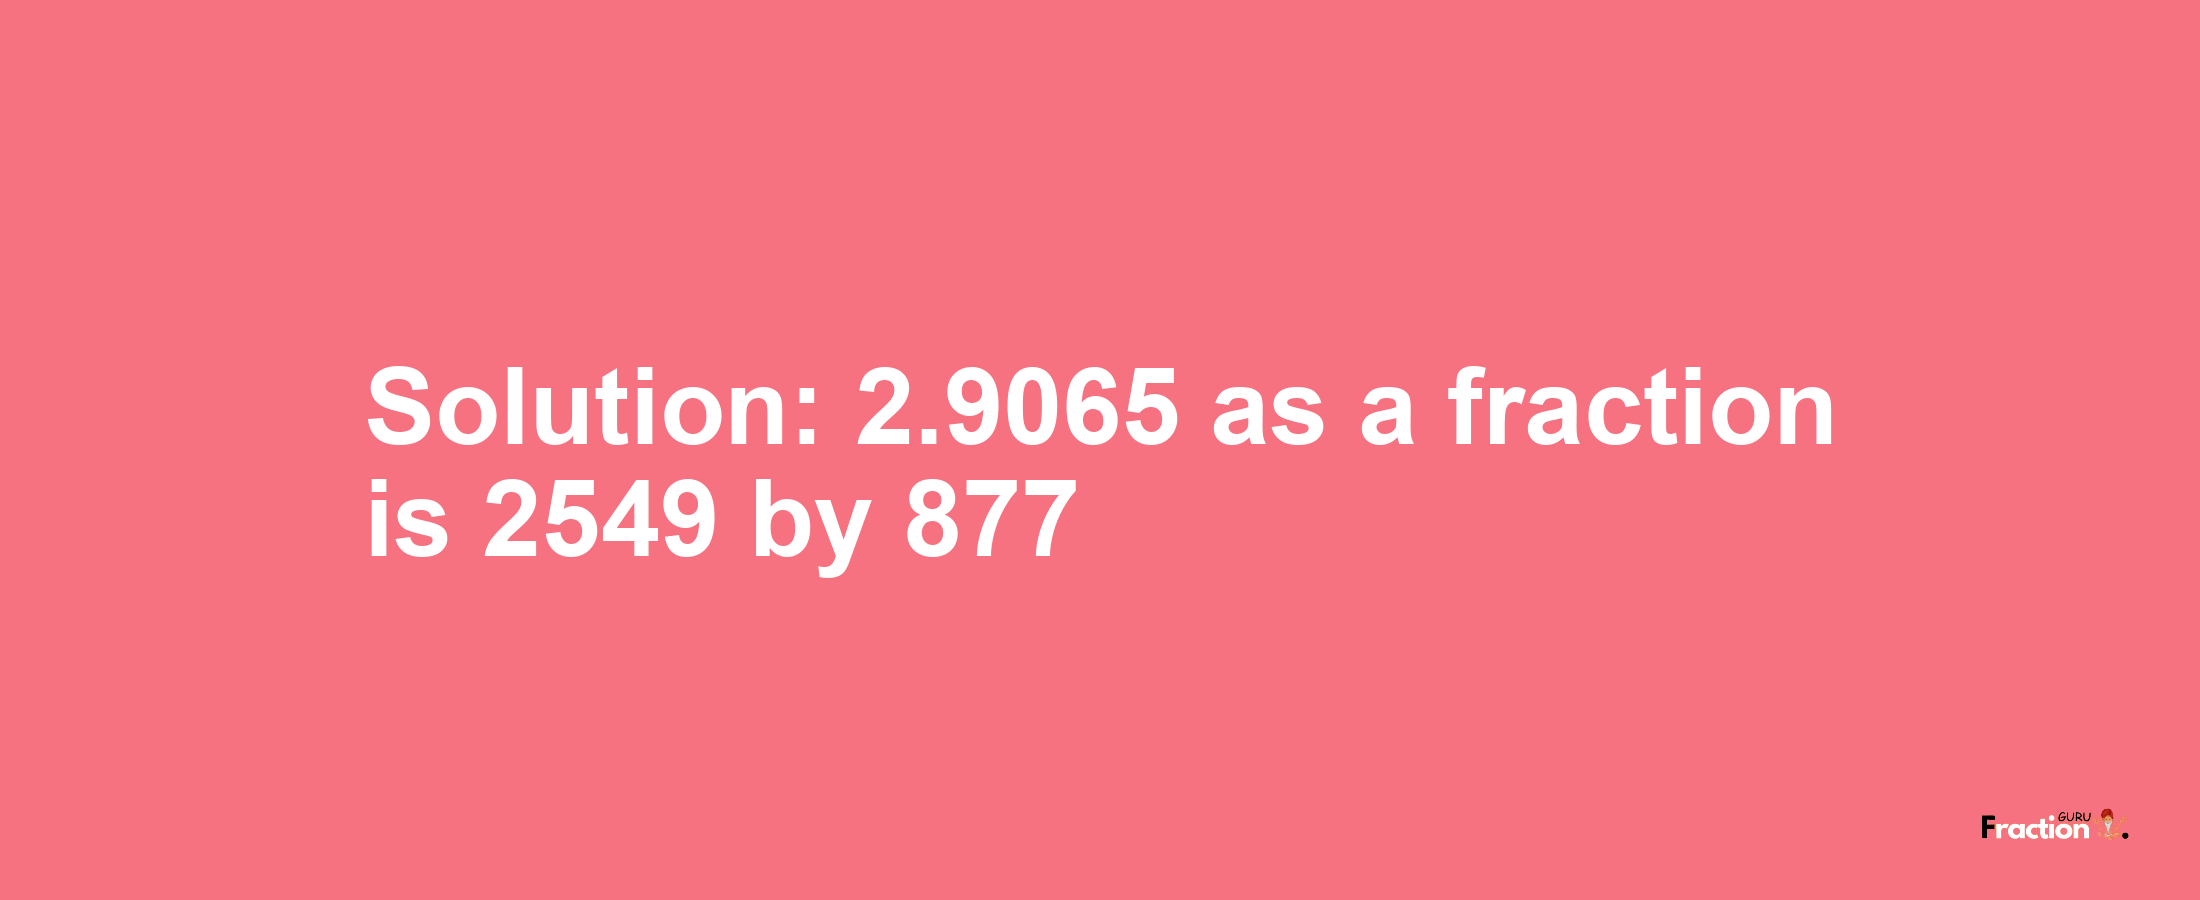 Solution:2.9065 as a fraction is 2549/877